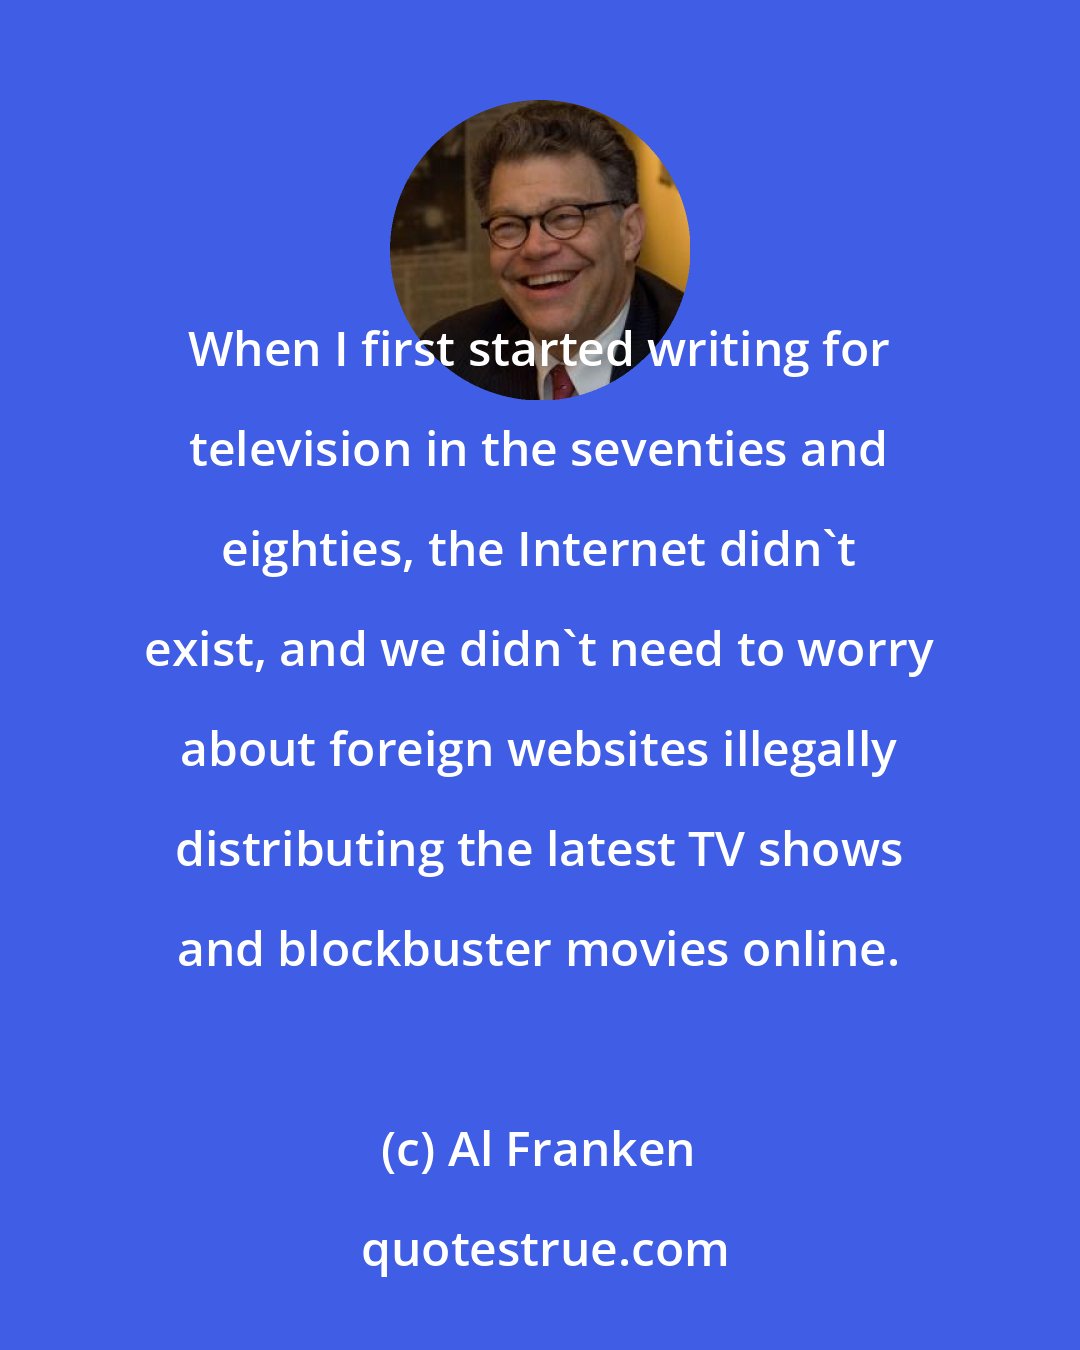 Al Franken: When I first started writing for television in the seventies and eighties, the Internet didn't exist, and we didn't need to worry about foreign websites illegally distributing the latest TV shows and blockbuster movies online.